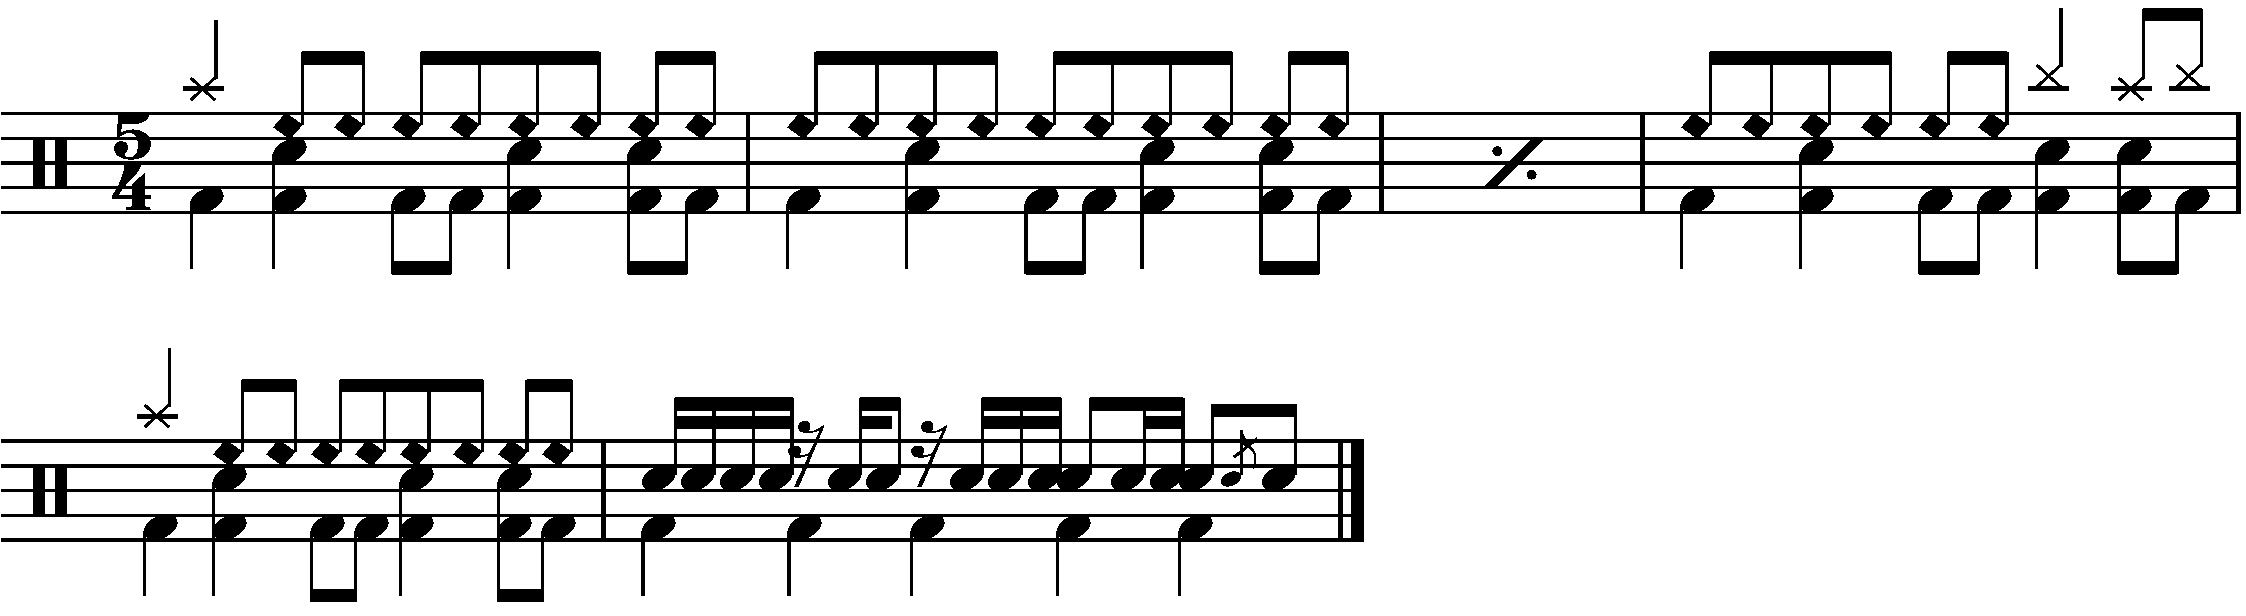 A six bar phrase made of two parts.